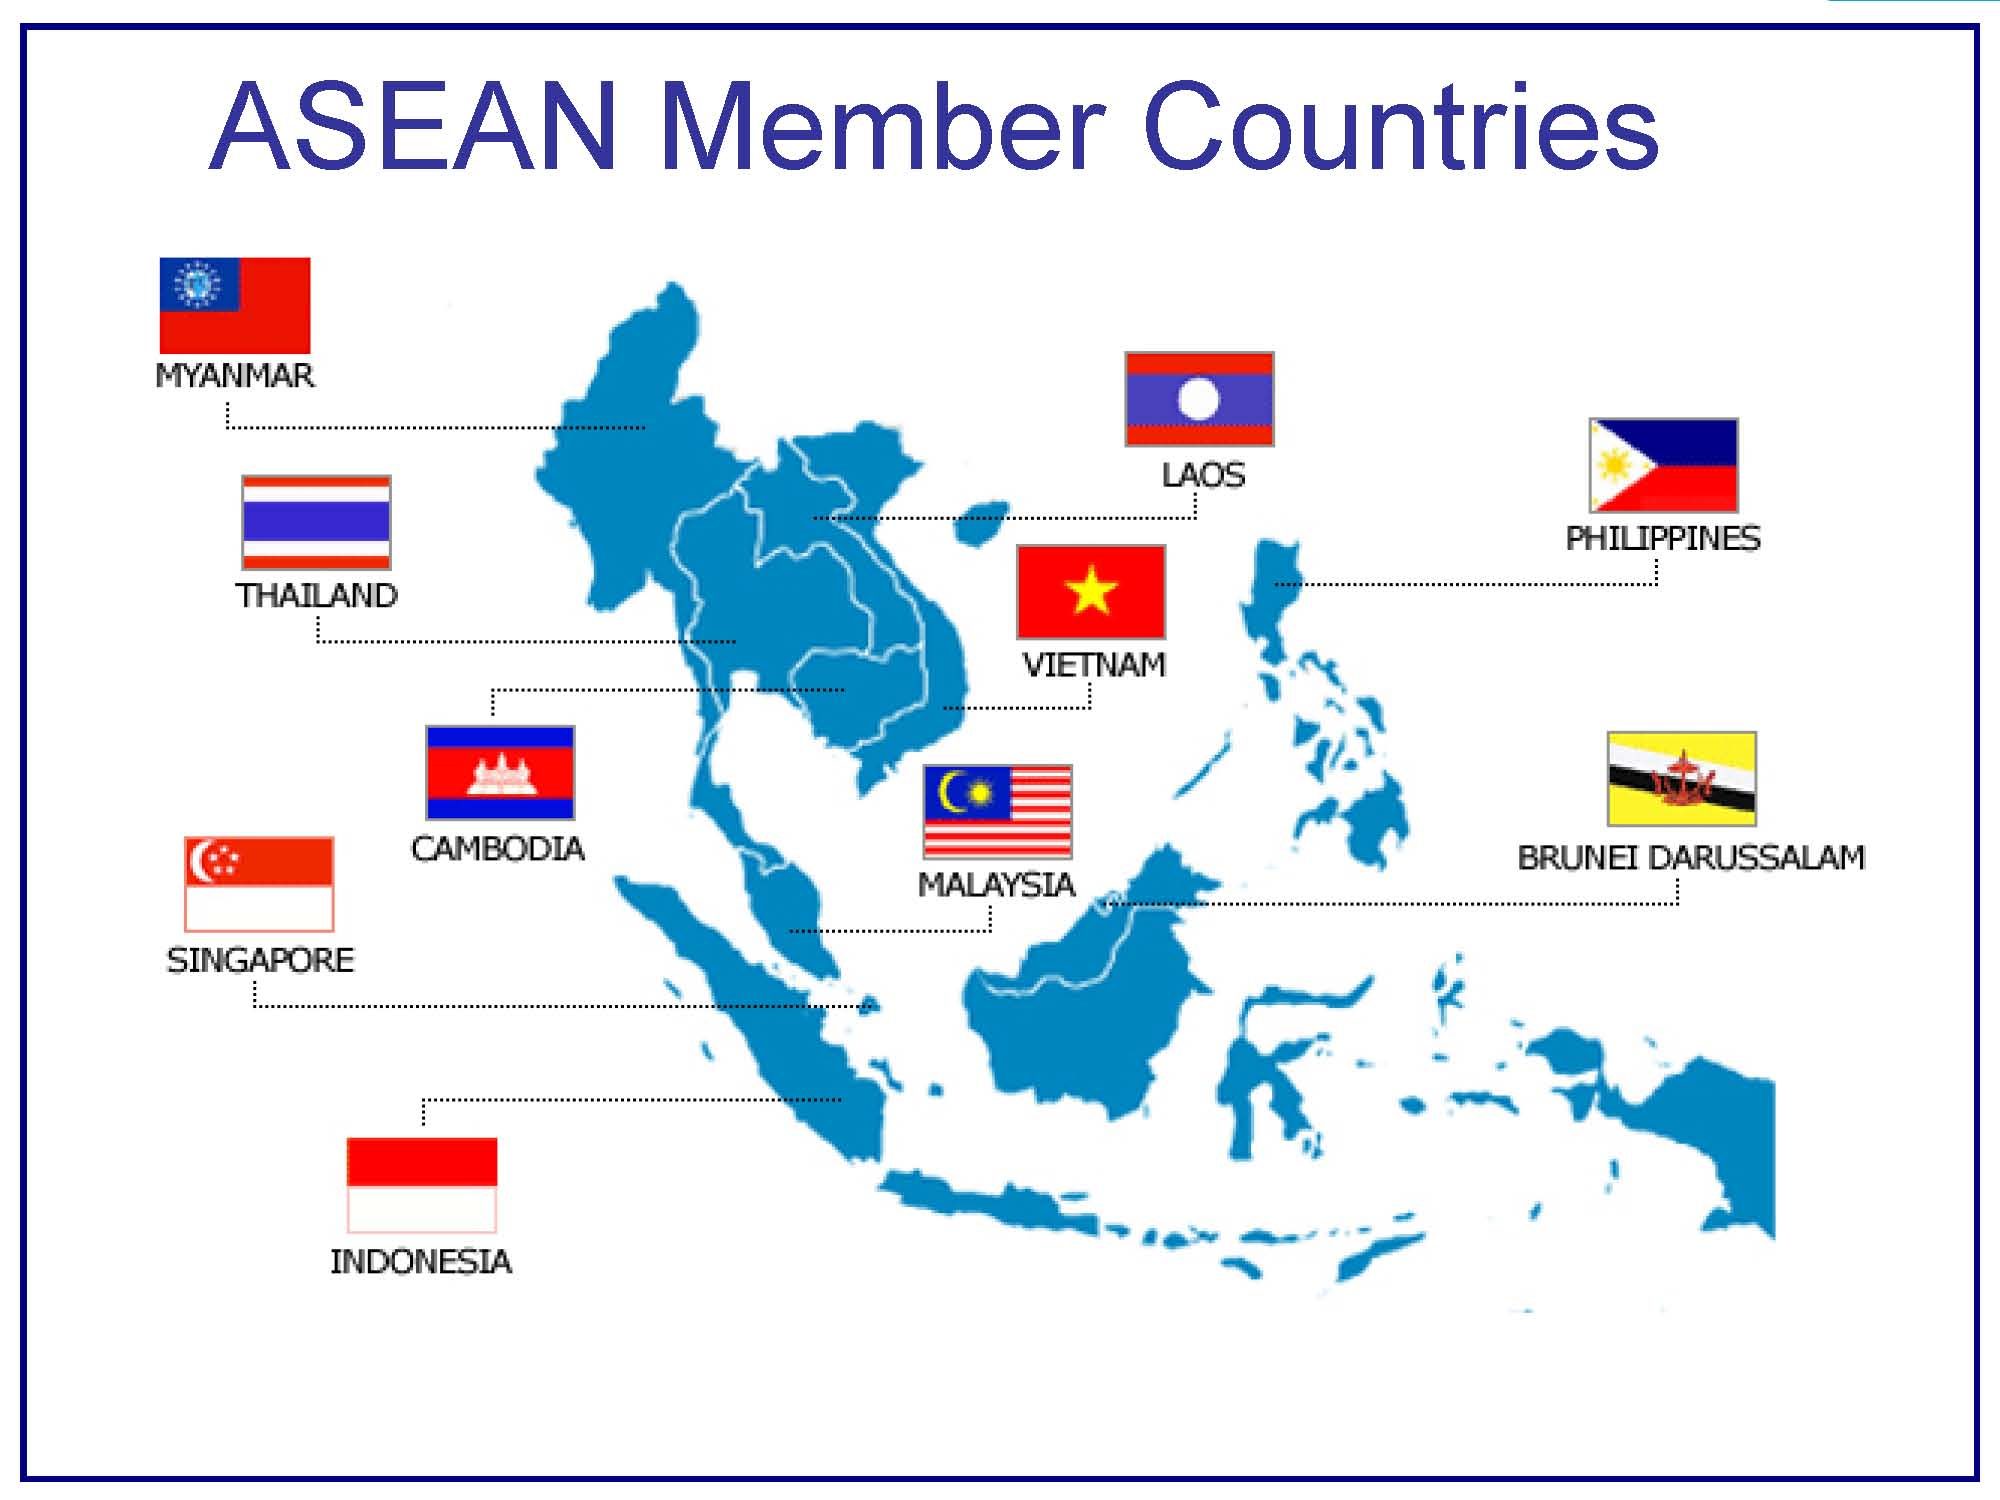 Private-public partnership required to sustain ASEAN Economic Community: EY